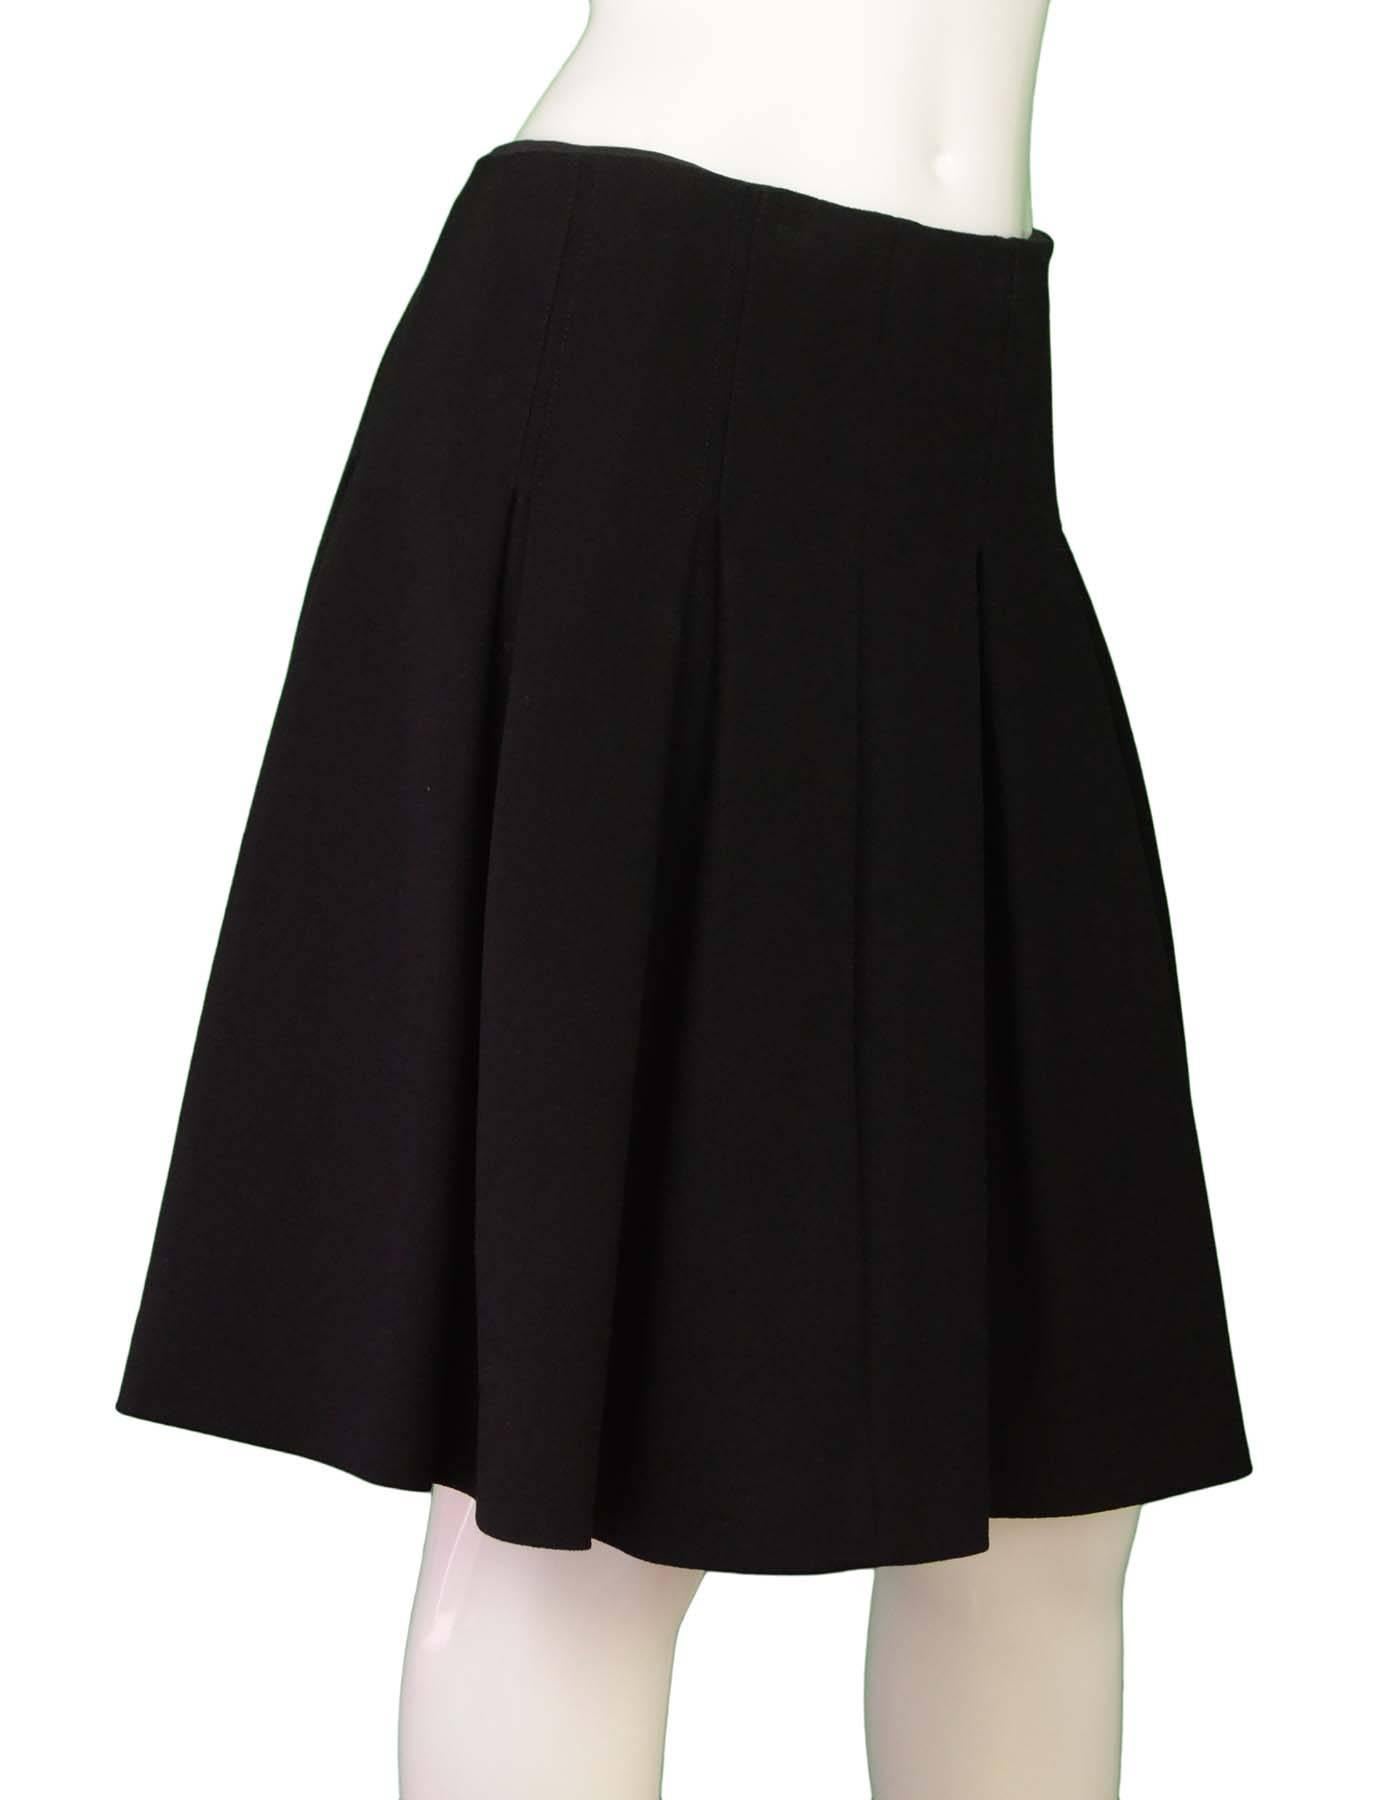 Proenza Schouler Black Inverted Pleated Skirt Sz 8

Made In: China
Color: Black
Composition: 51% Viscose, 34% Nylon, 15% Elastane
Lining: Black, 100% Silk
Closure/Opening: Hidden side zip closure
Exterior Pockets: None
Interior Pockets: